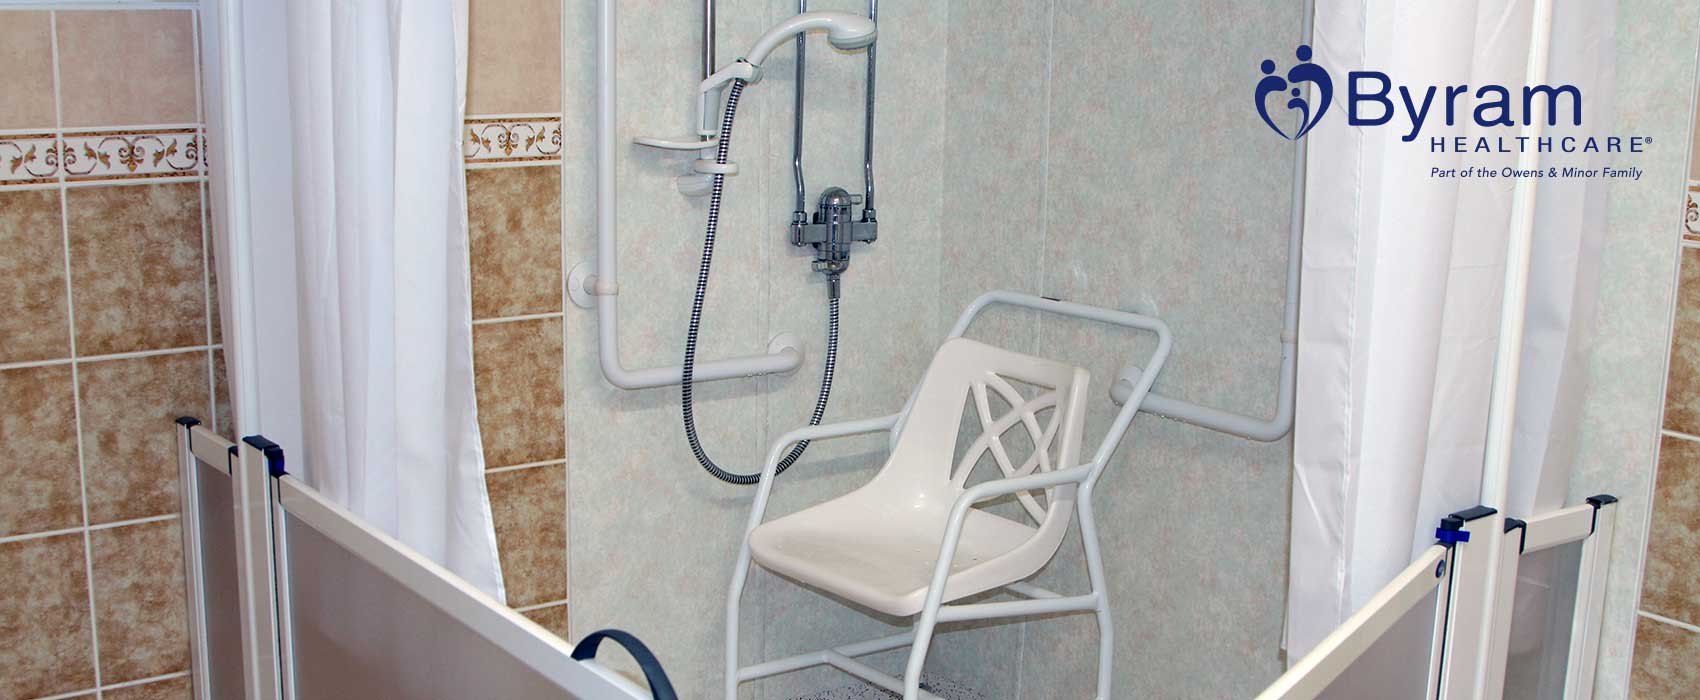 Wheelchair accessible shower.